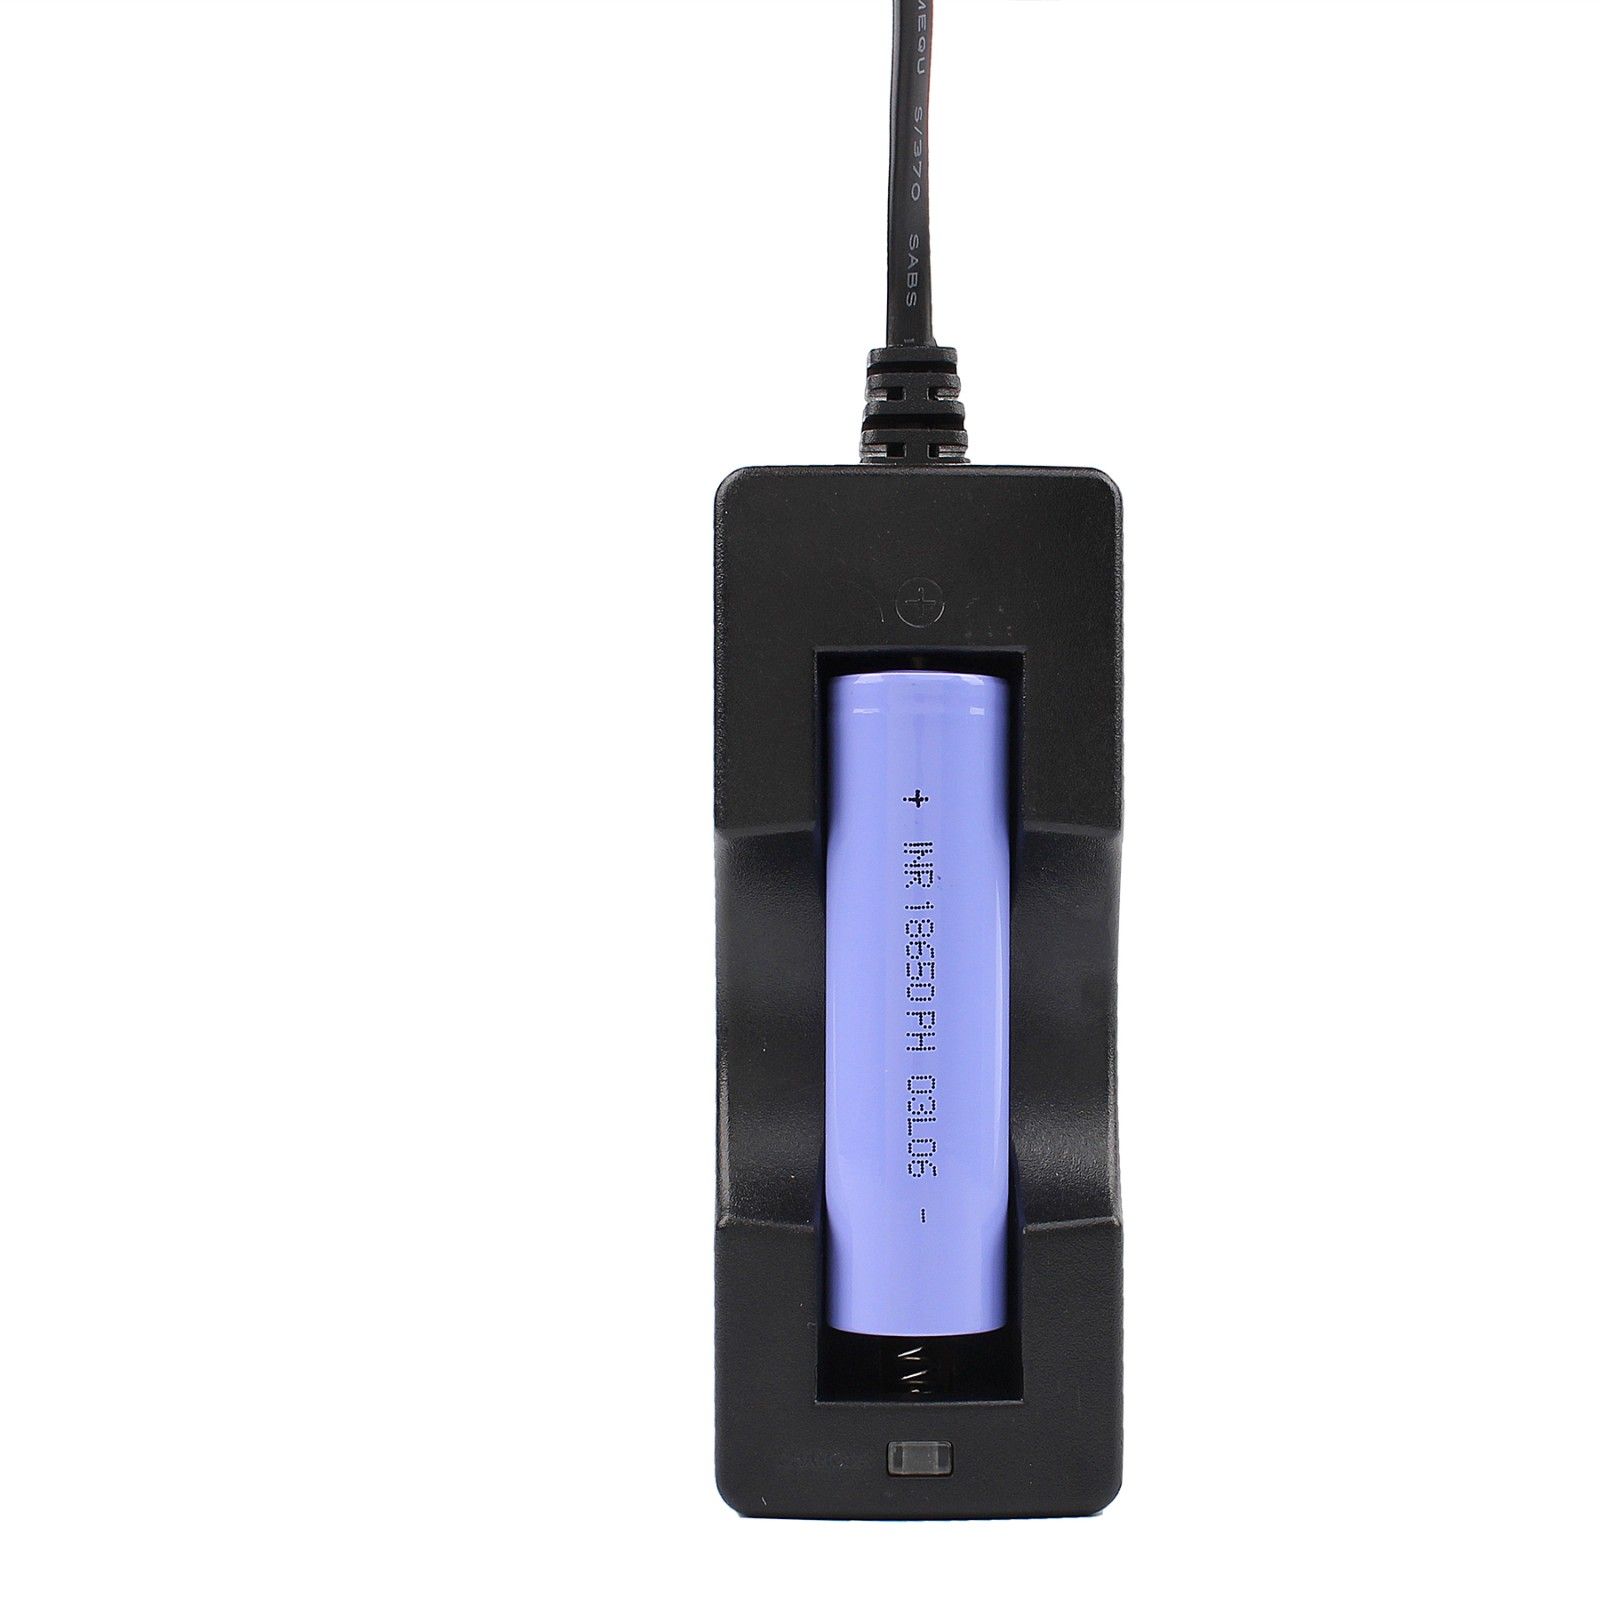 3000mAh-37V-18650-Lithium-Batteries-With-Charger-High-Energy-Flashlight-Rechargeable-Li-Ion-Battery-1635056